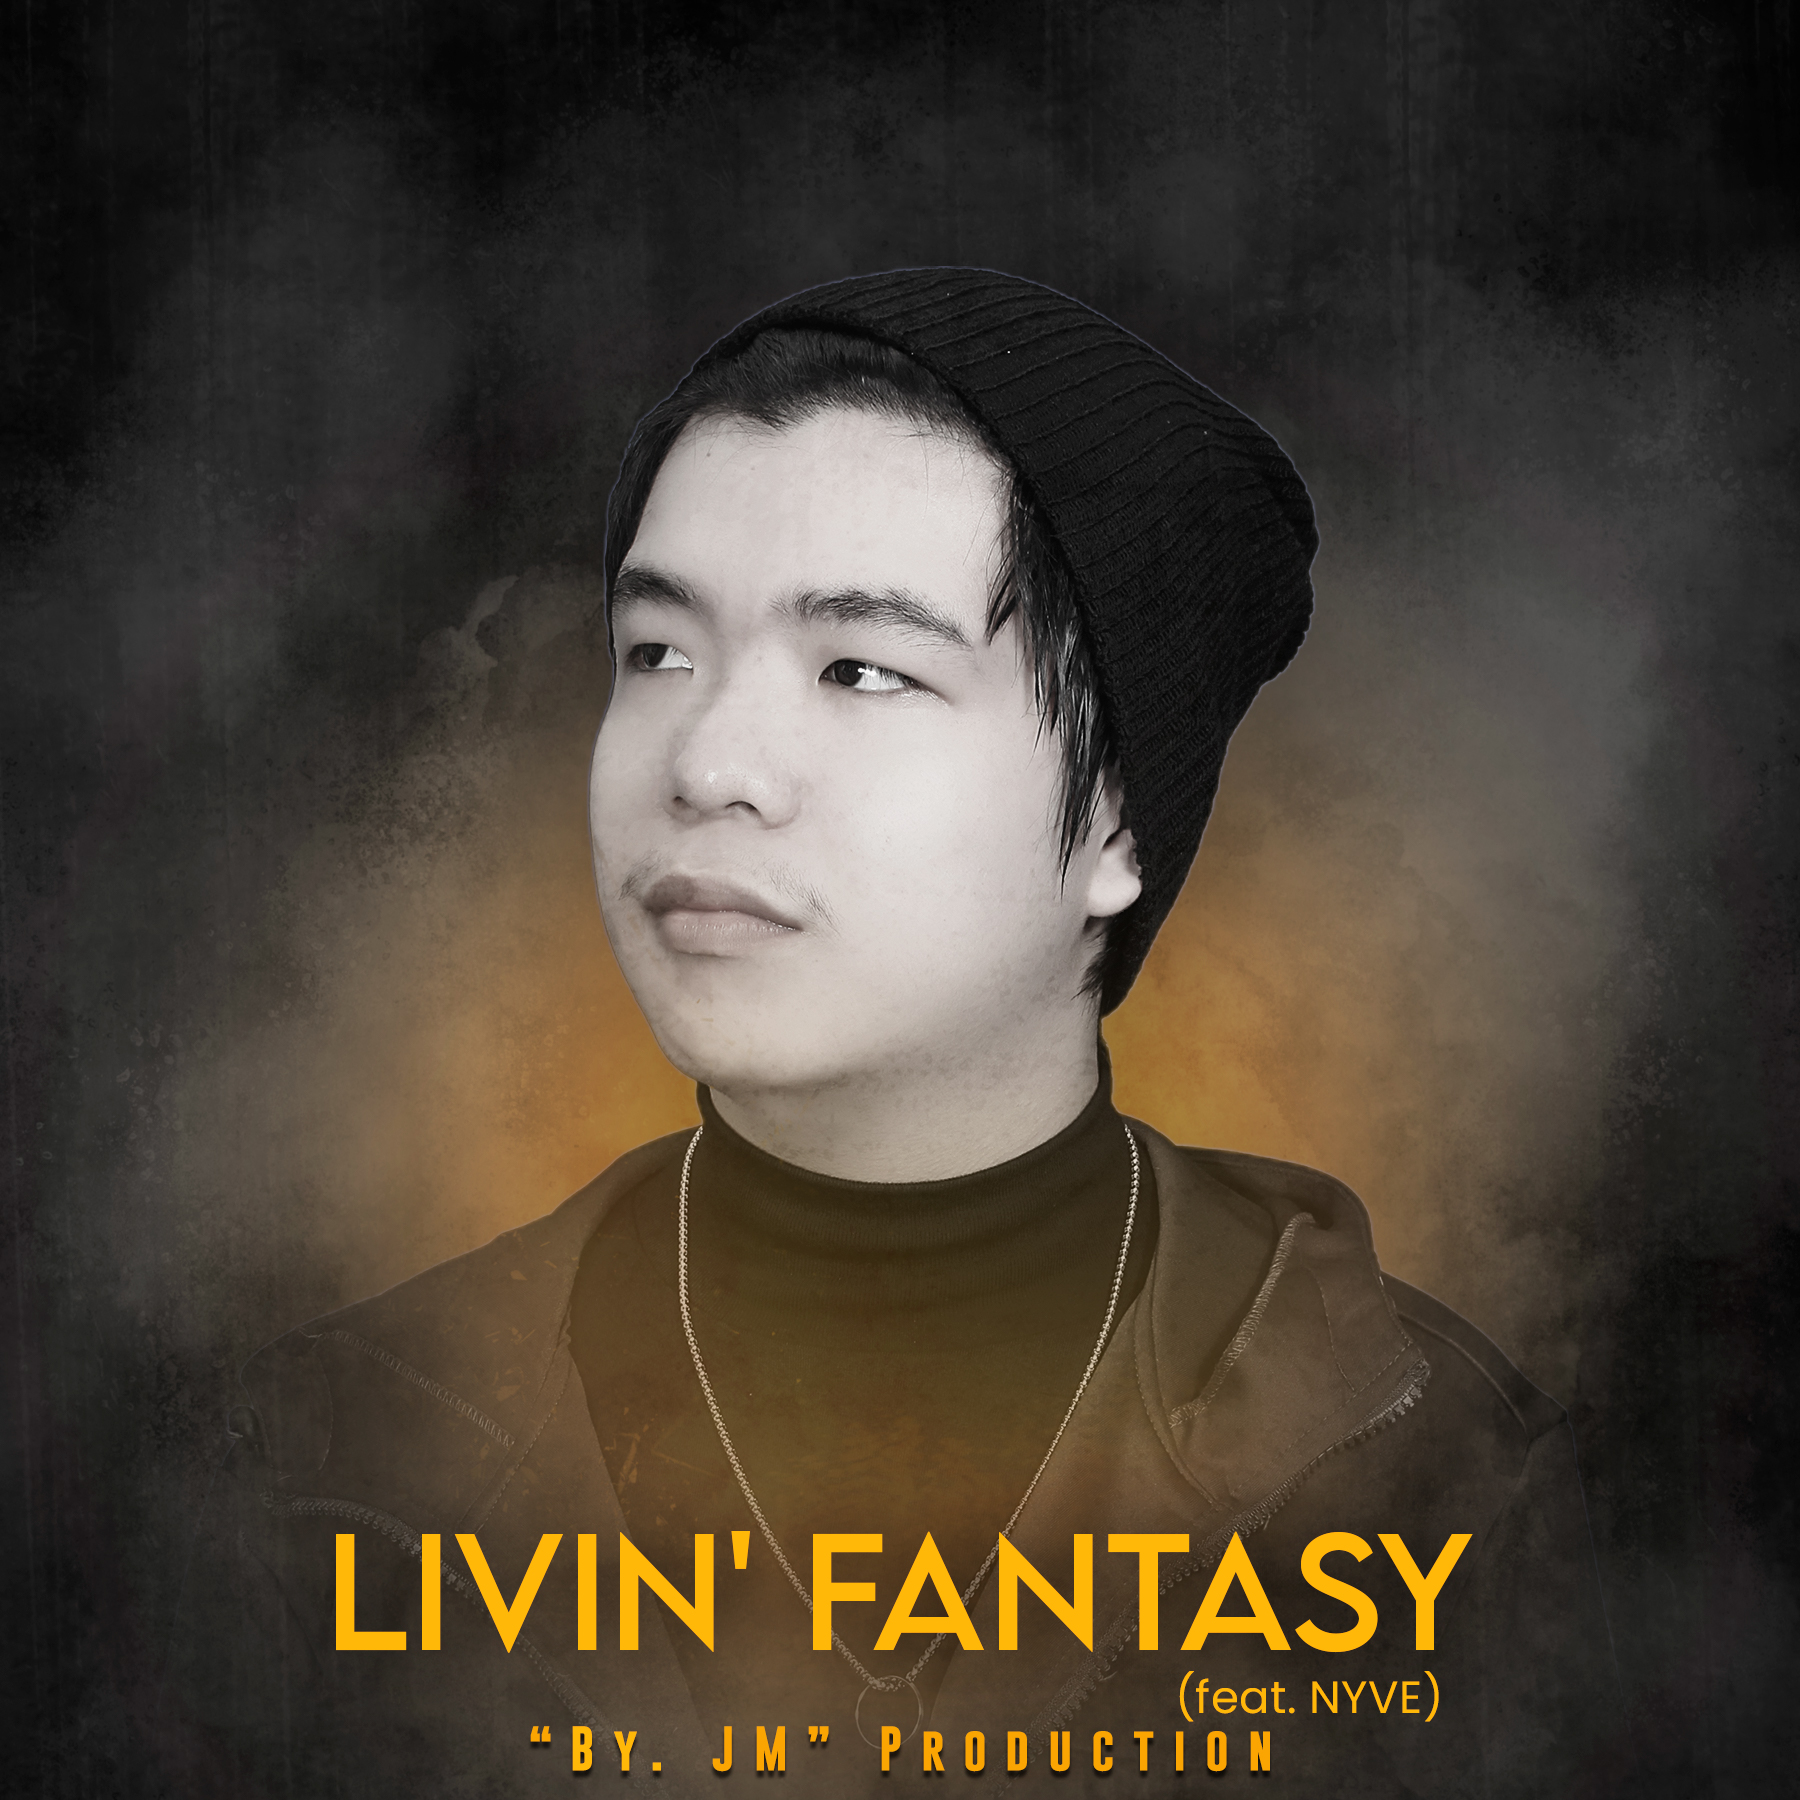 Jay M Chronicles "Livin' Fantasy" In His Debut Single